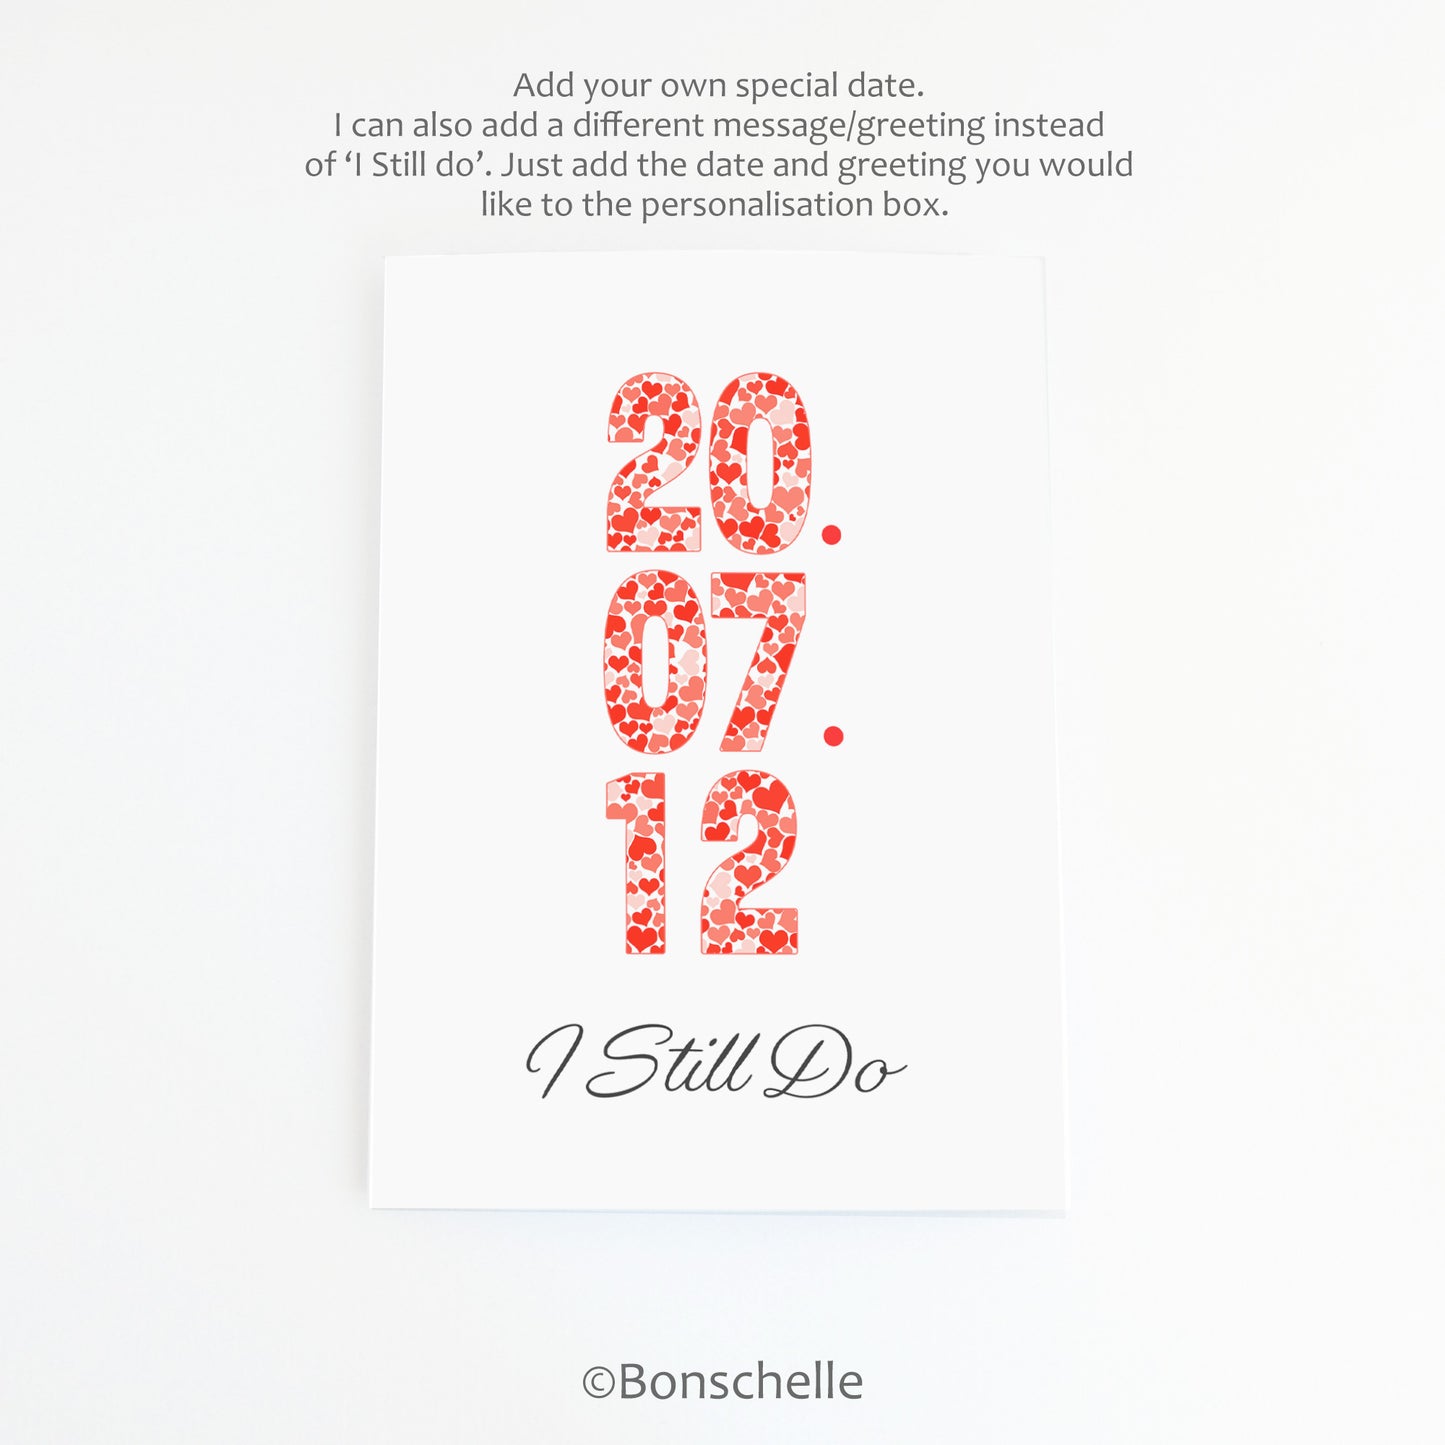 Front view of a handmade greeting Card with a personalised date in heart patterned numbers and the words 'I Still Do' beneath on the front, with a brown envelope and ordering instruction.